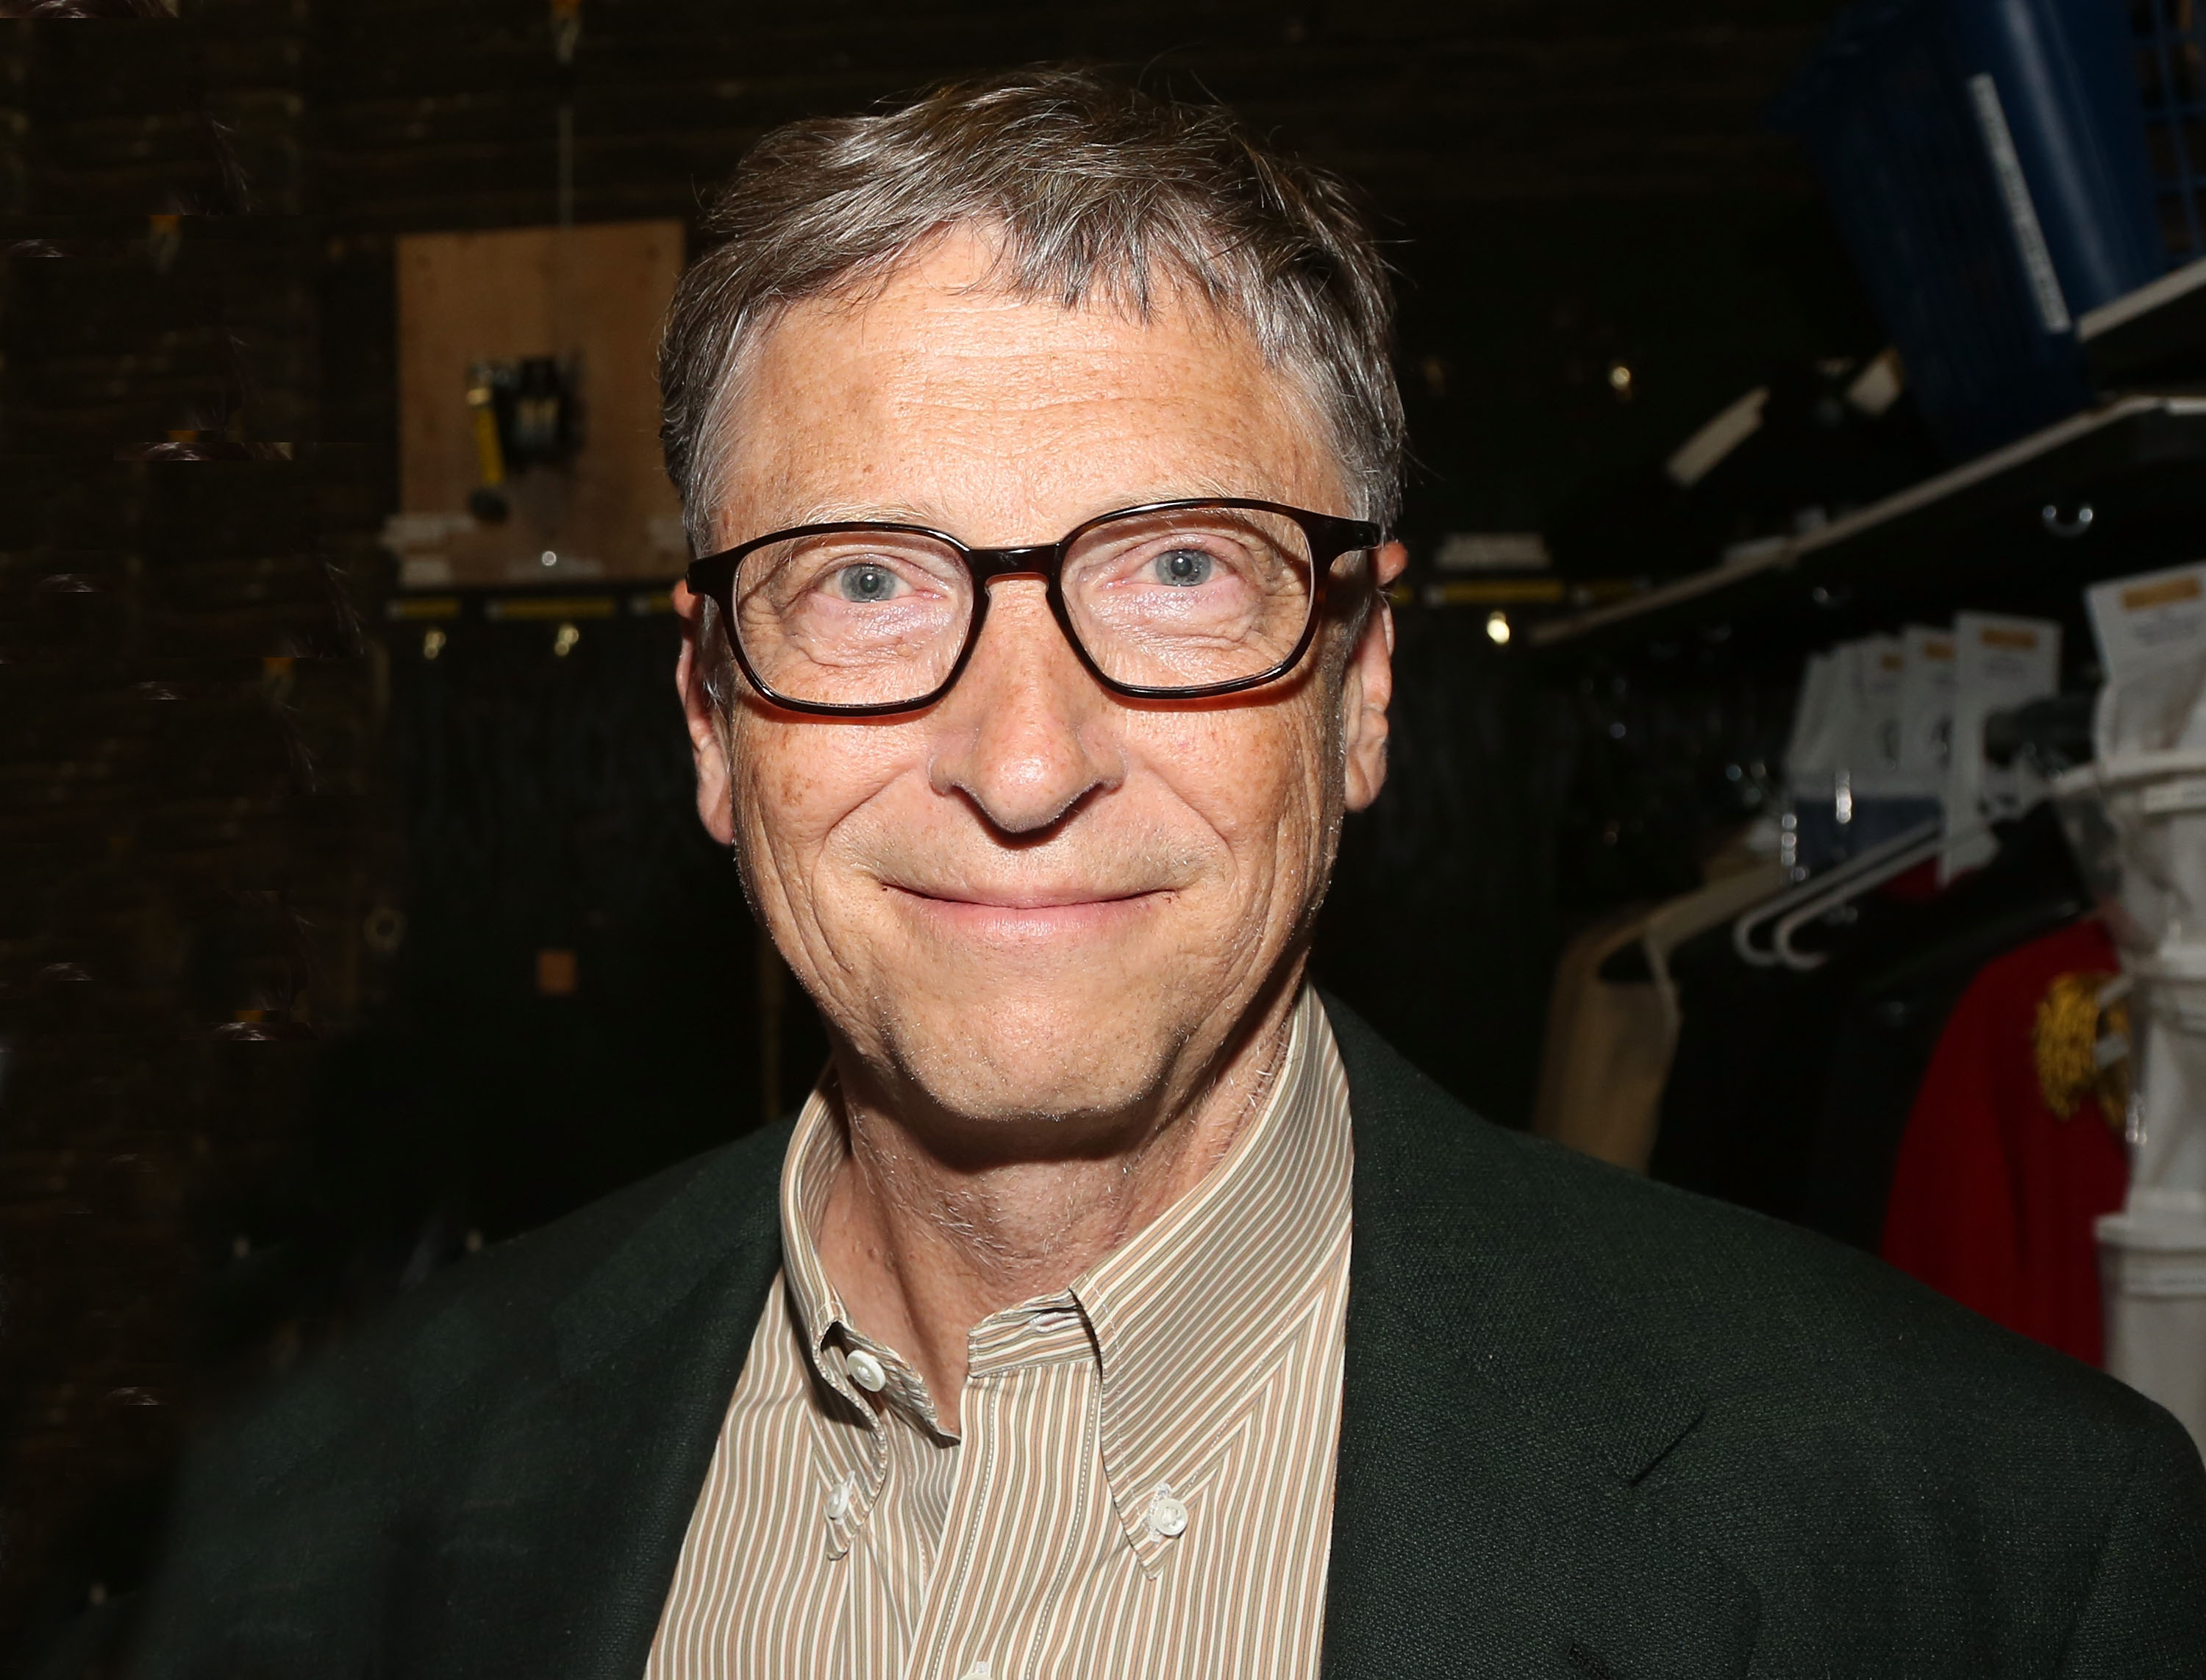 Bill Gates at the backtage of the musical 'Hamilton' on Broadway in New York City on Oct. 11, 2015. (Bruce Glikas—FilmMagic/Getty Images)